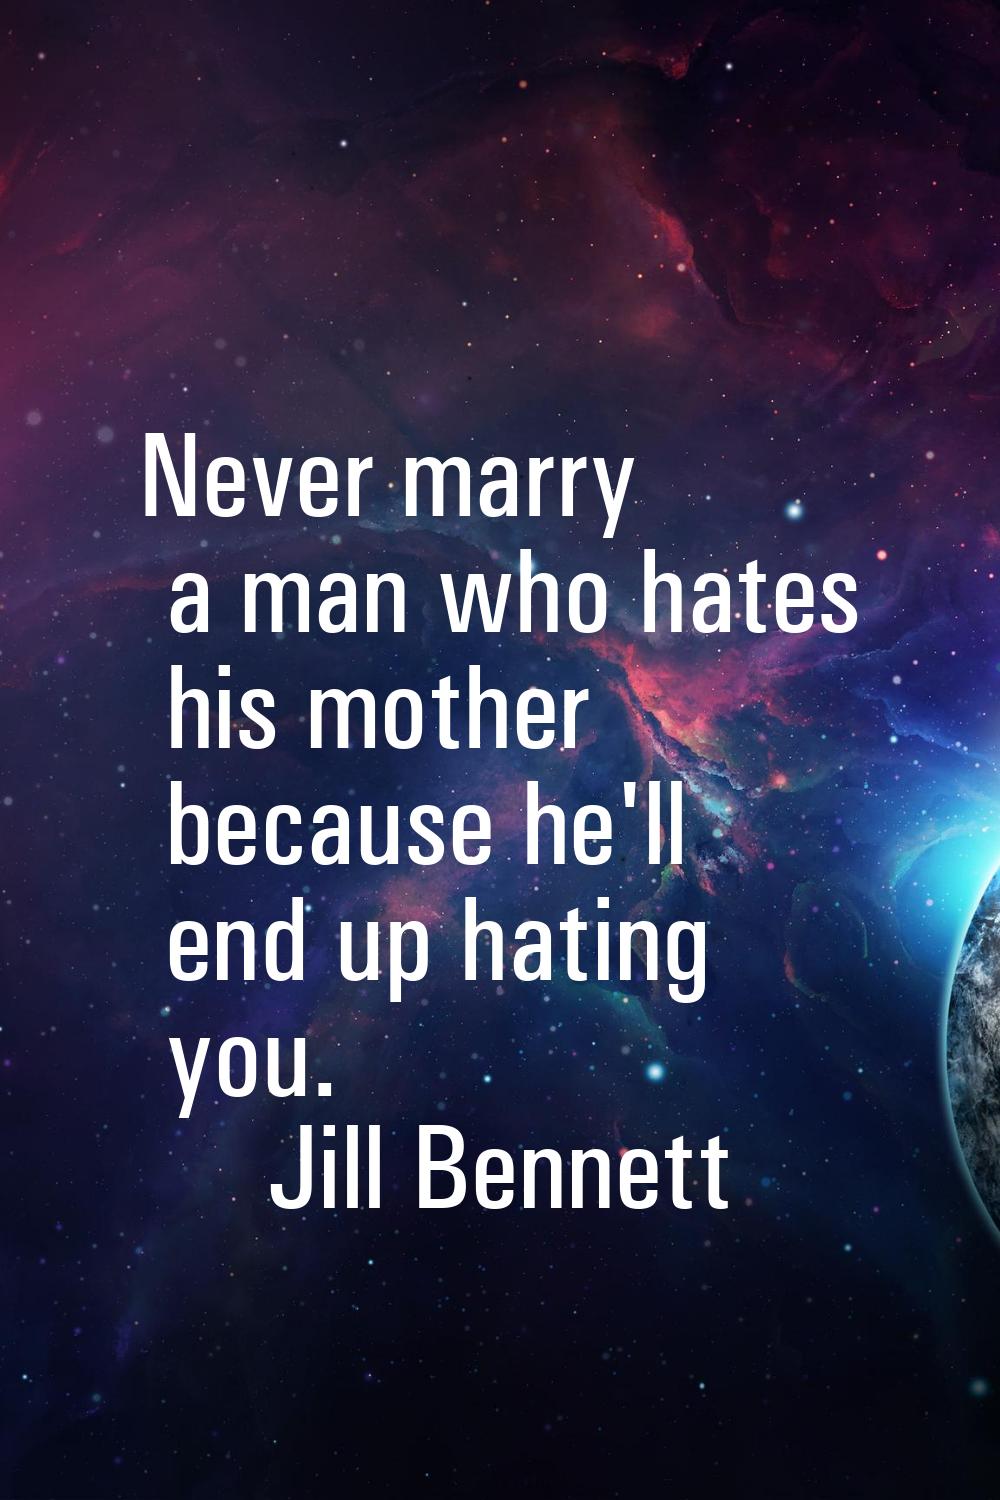 Never marry a man who hates his mother because he'll end up hating you.